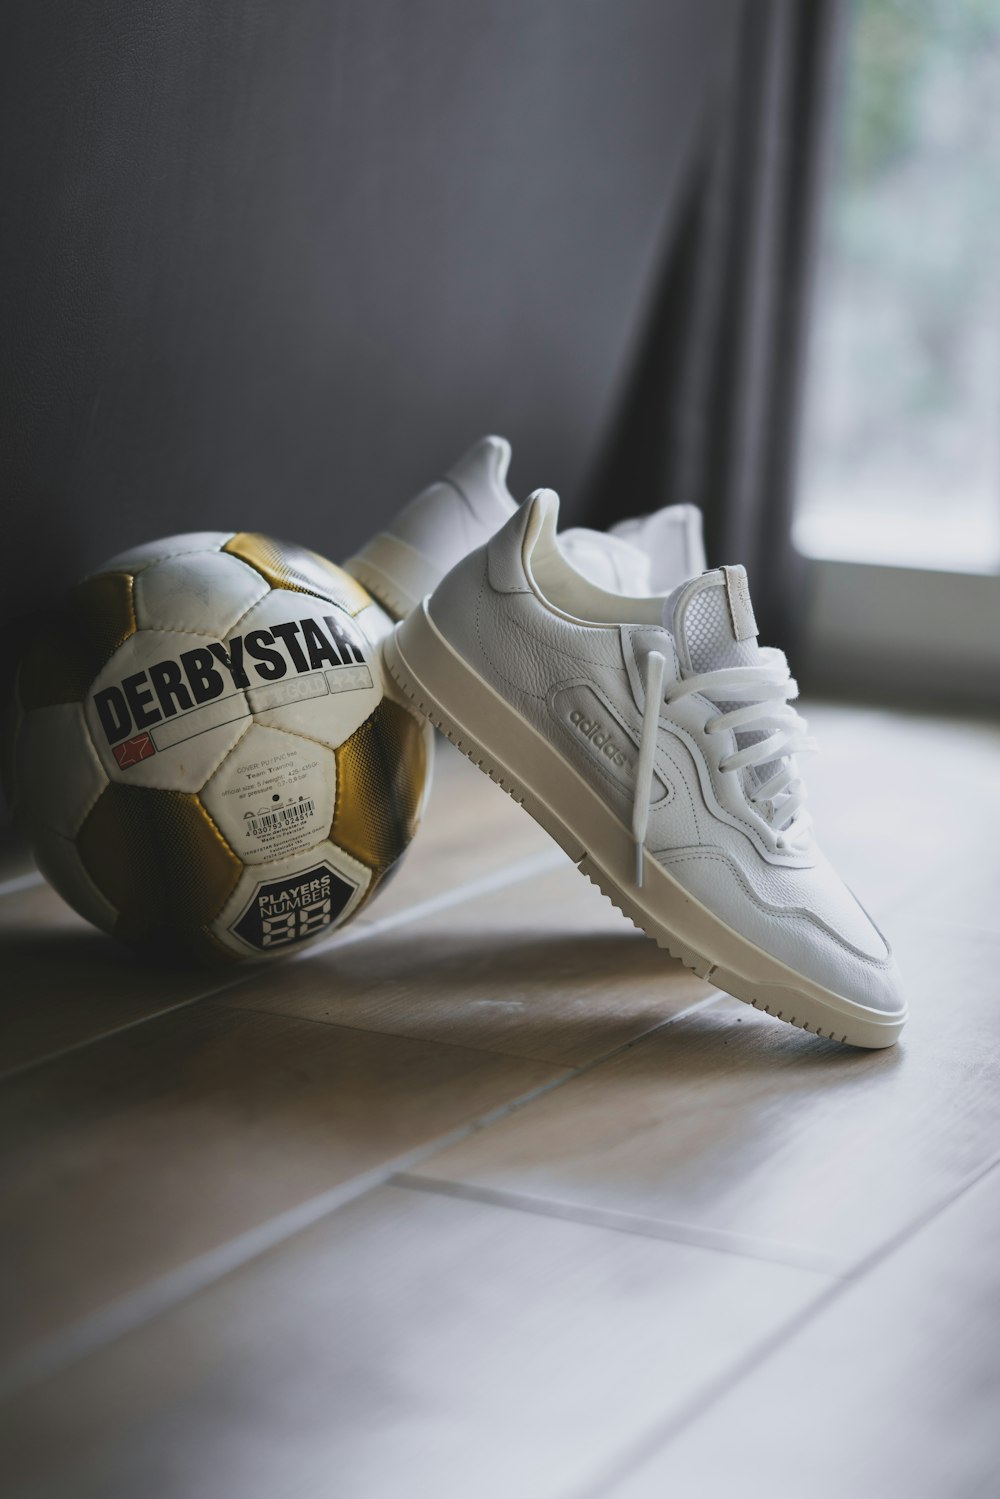 pair of white Adidas low-top sneakers beside Derbystar soccer ball photo –  Free Soccer Image on Unsplash